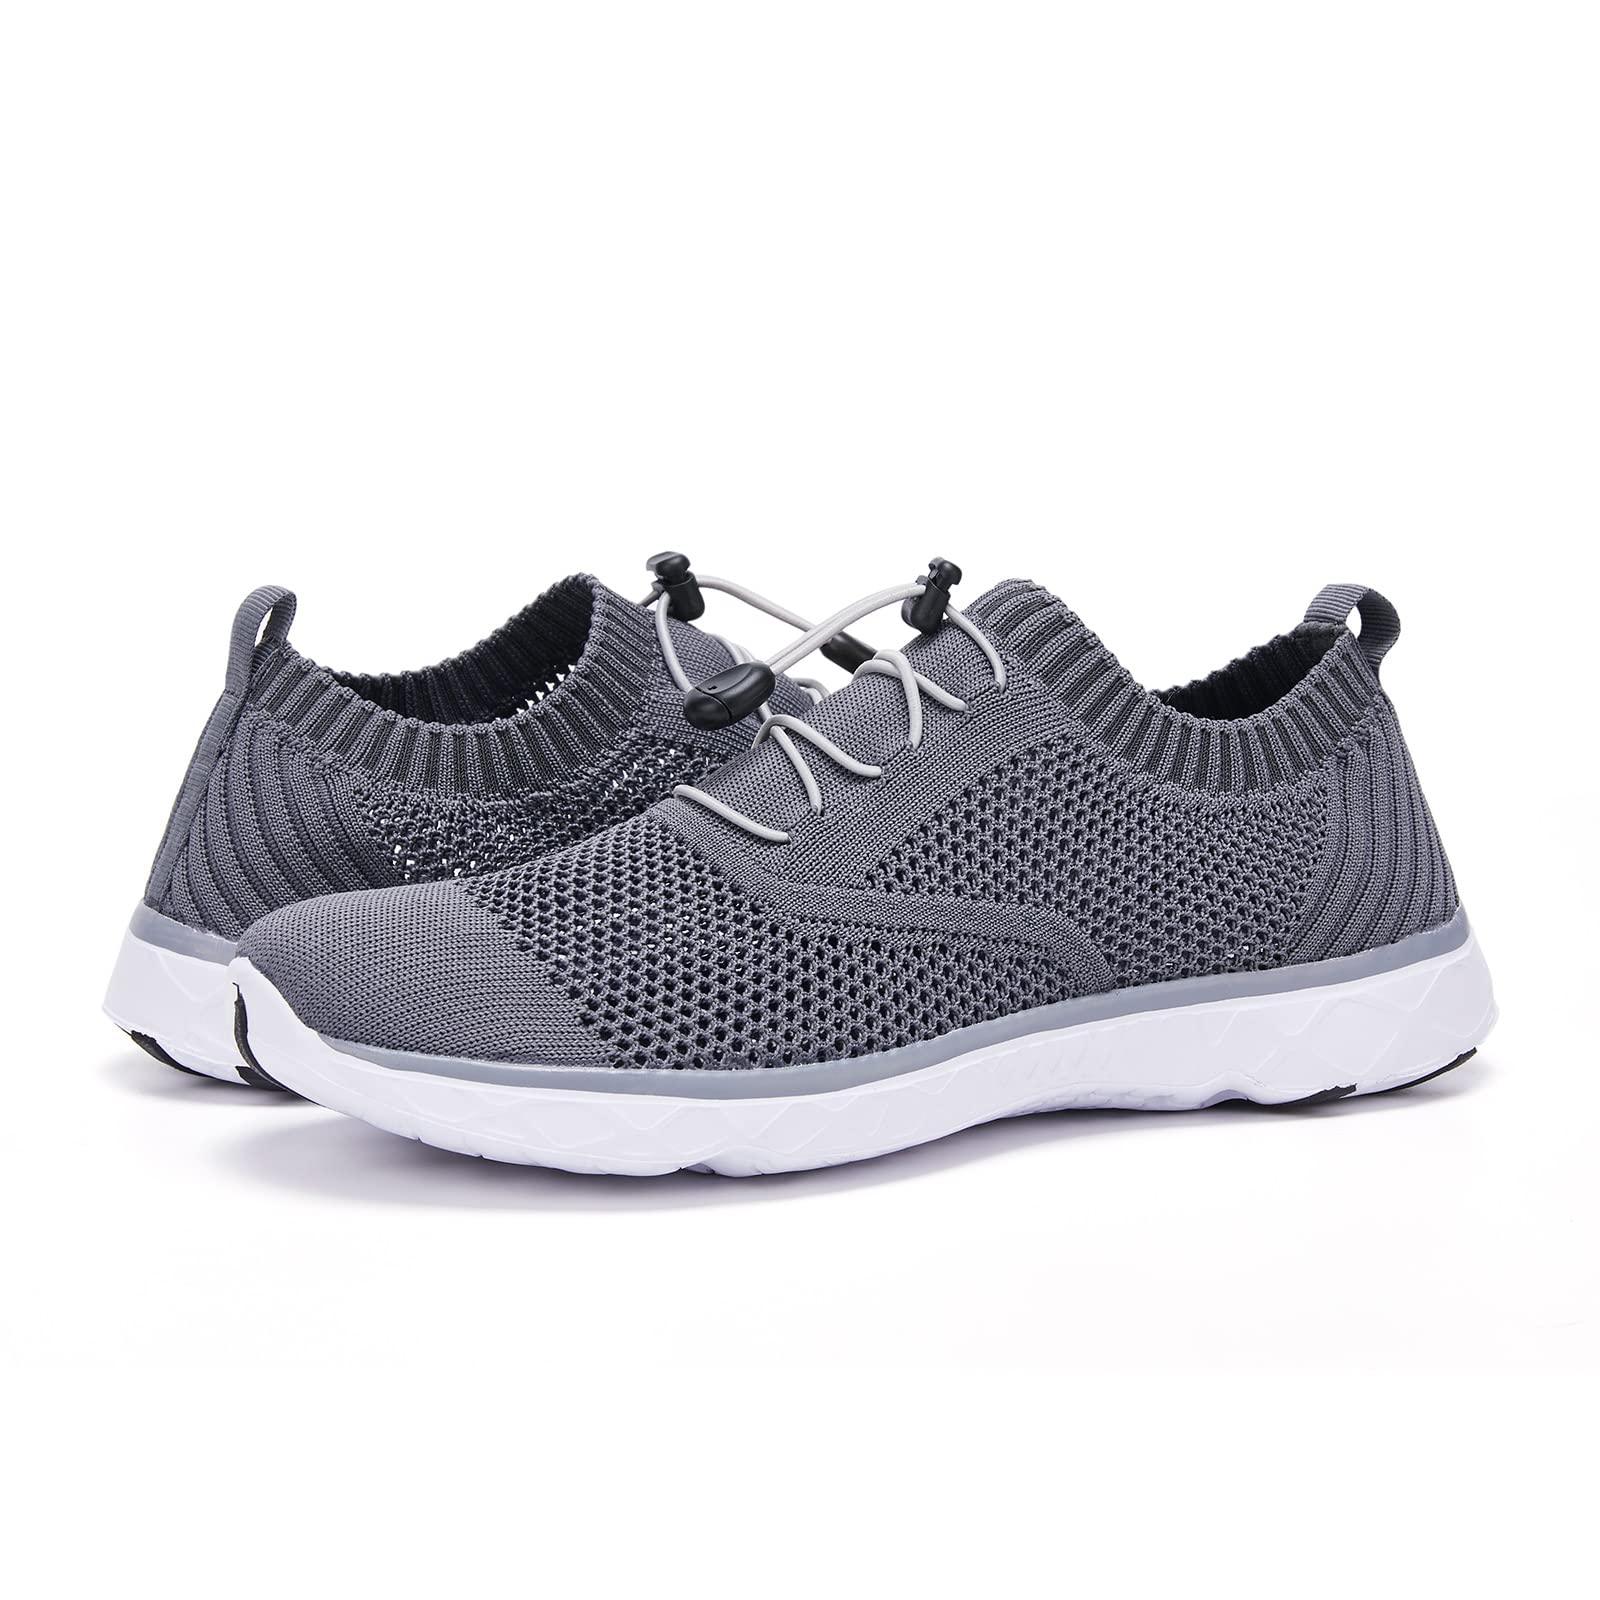 Aleader Men's Xdrain Classic Knit Water Shoes